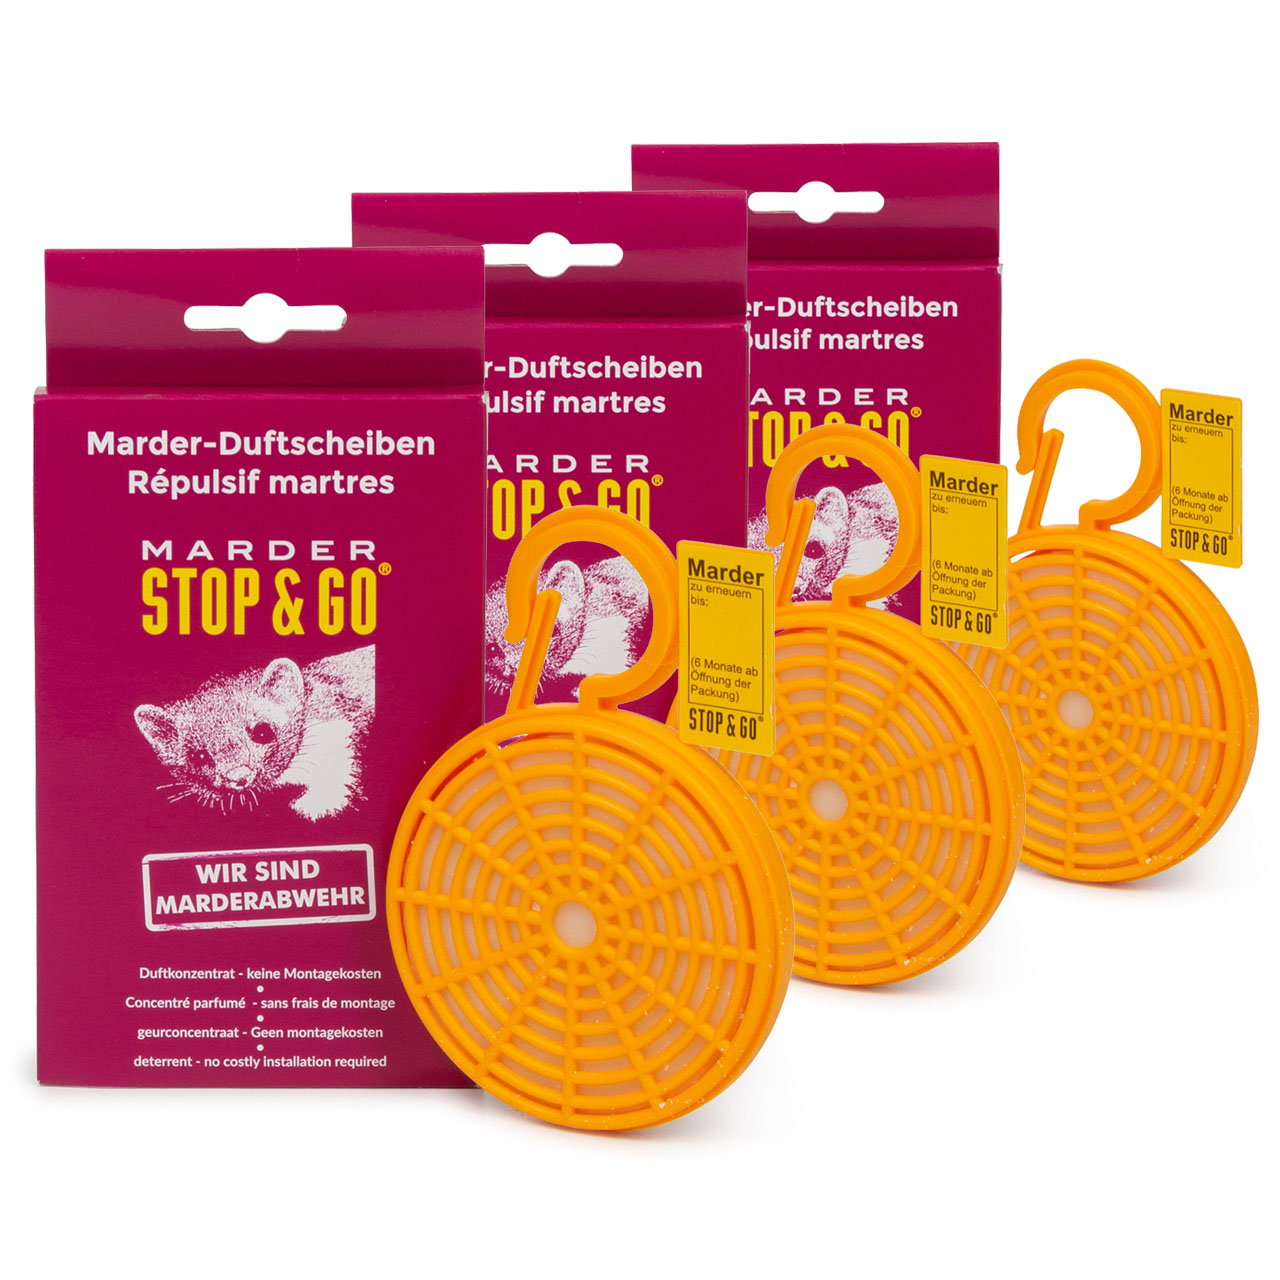 STOP&GO professional marten repellents – protect your car and the